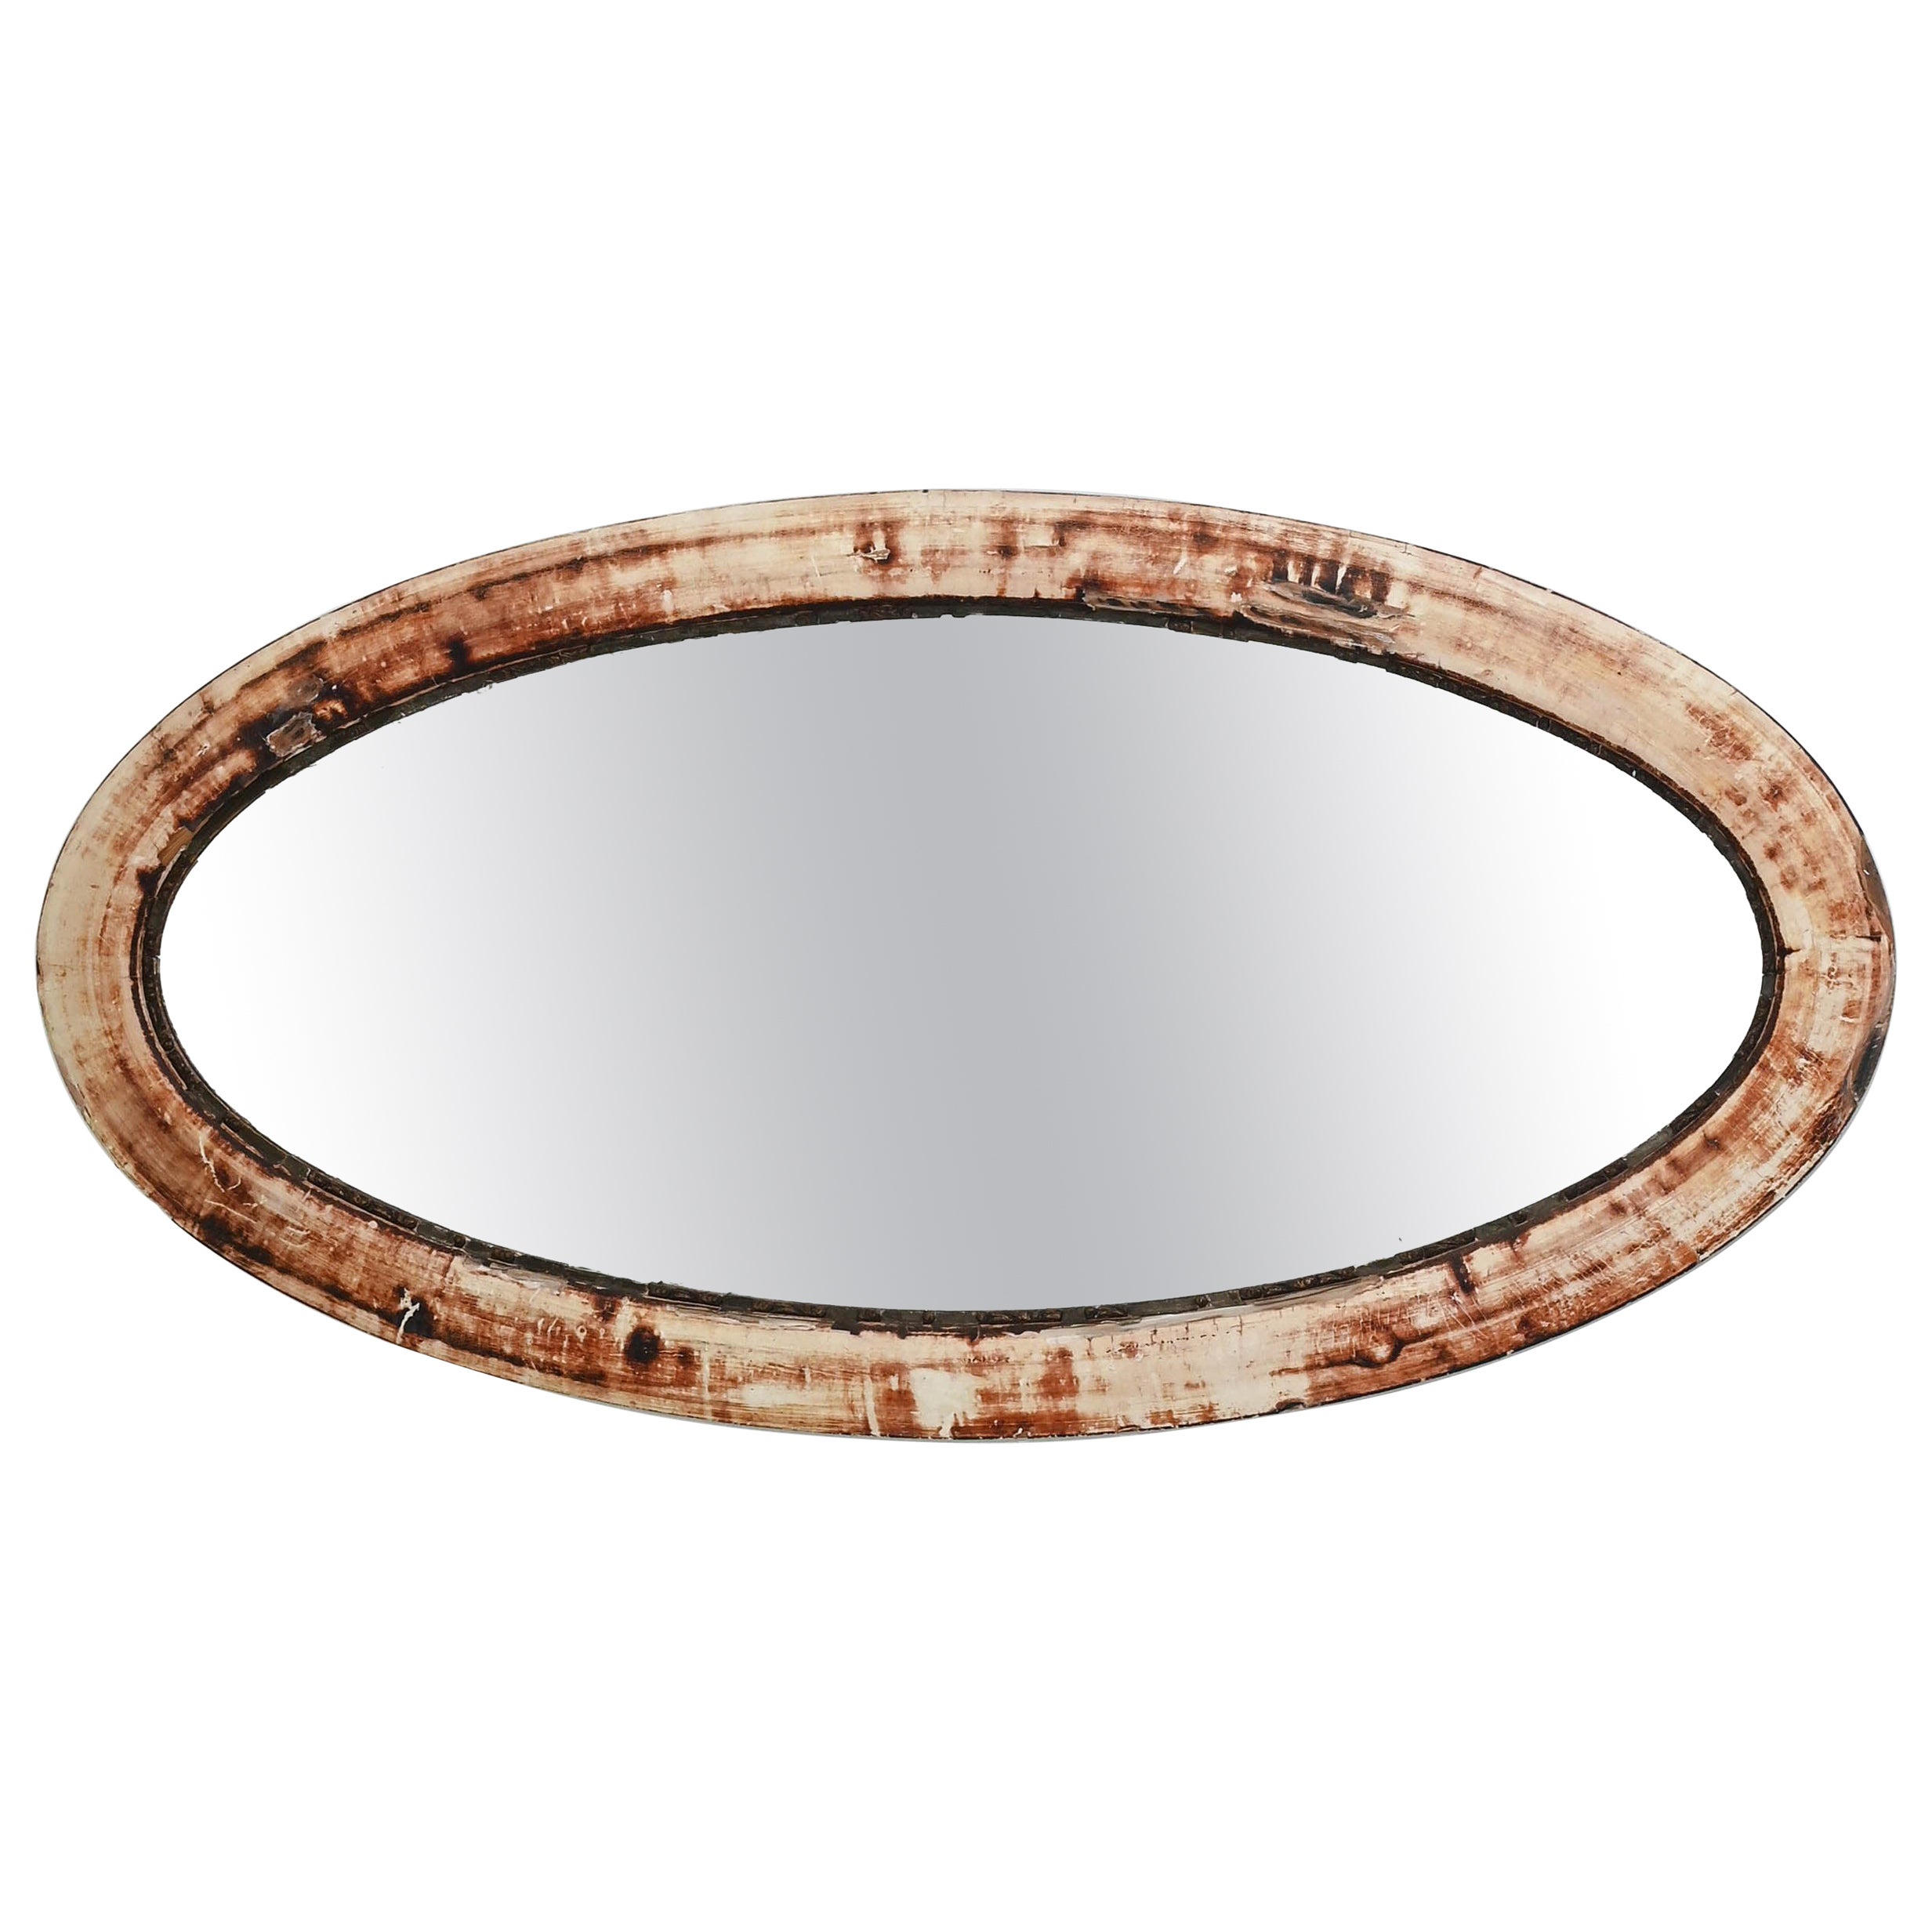 1930s French Oval Wall Mirror